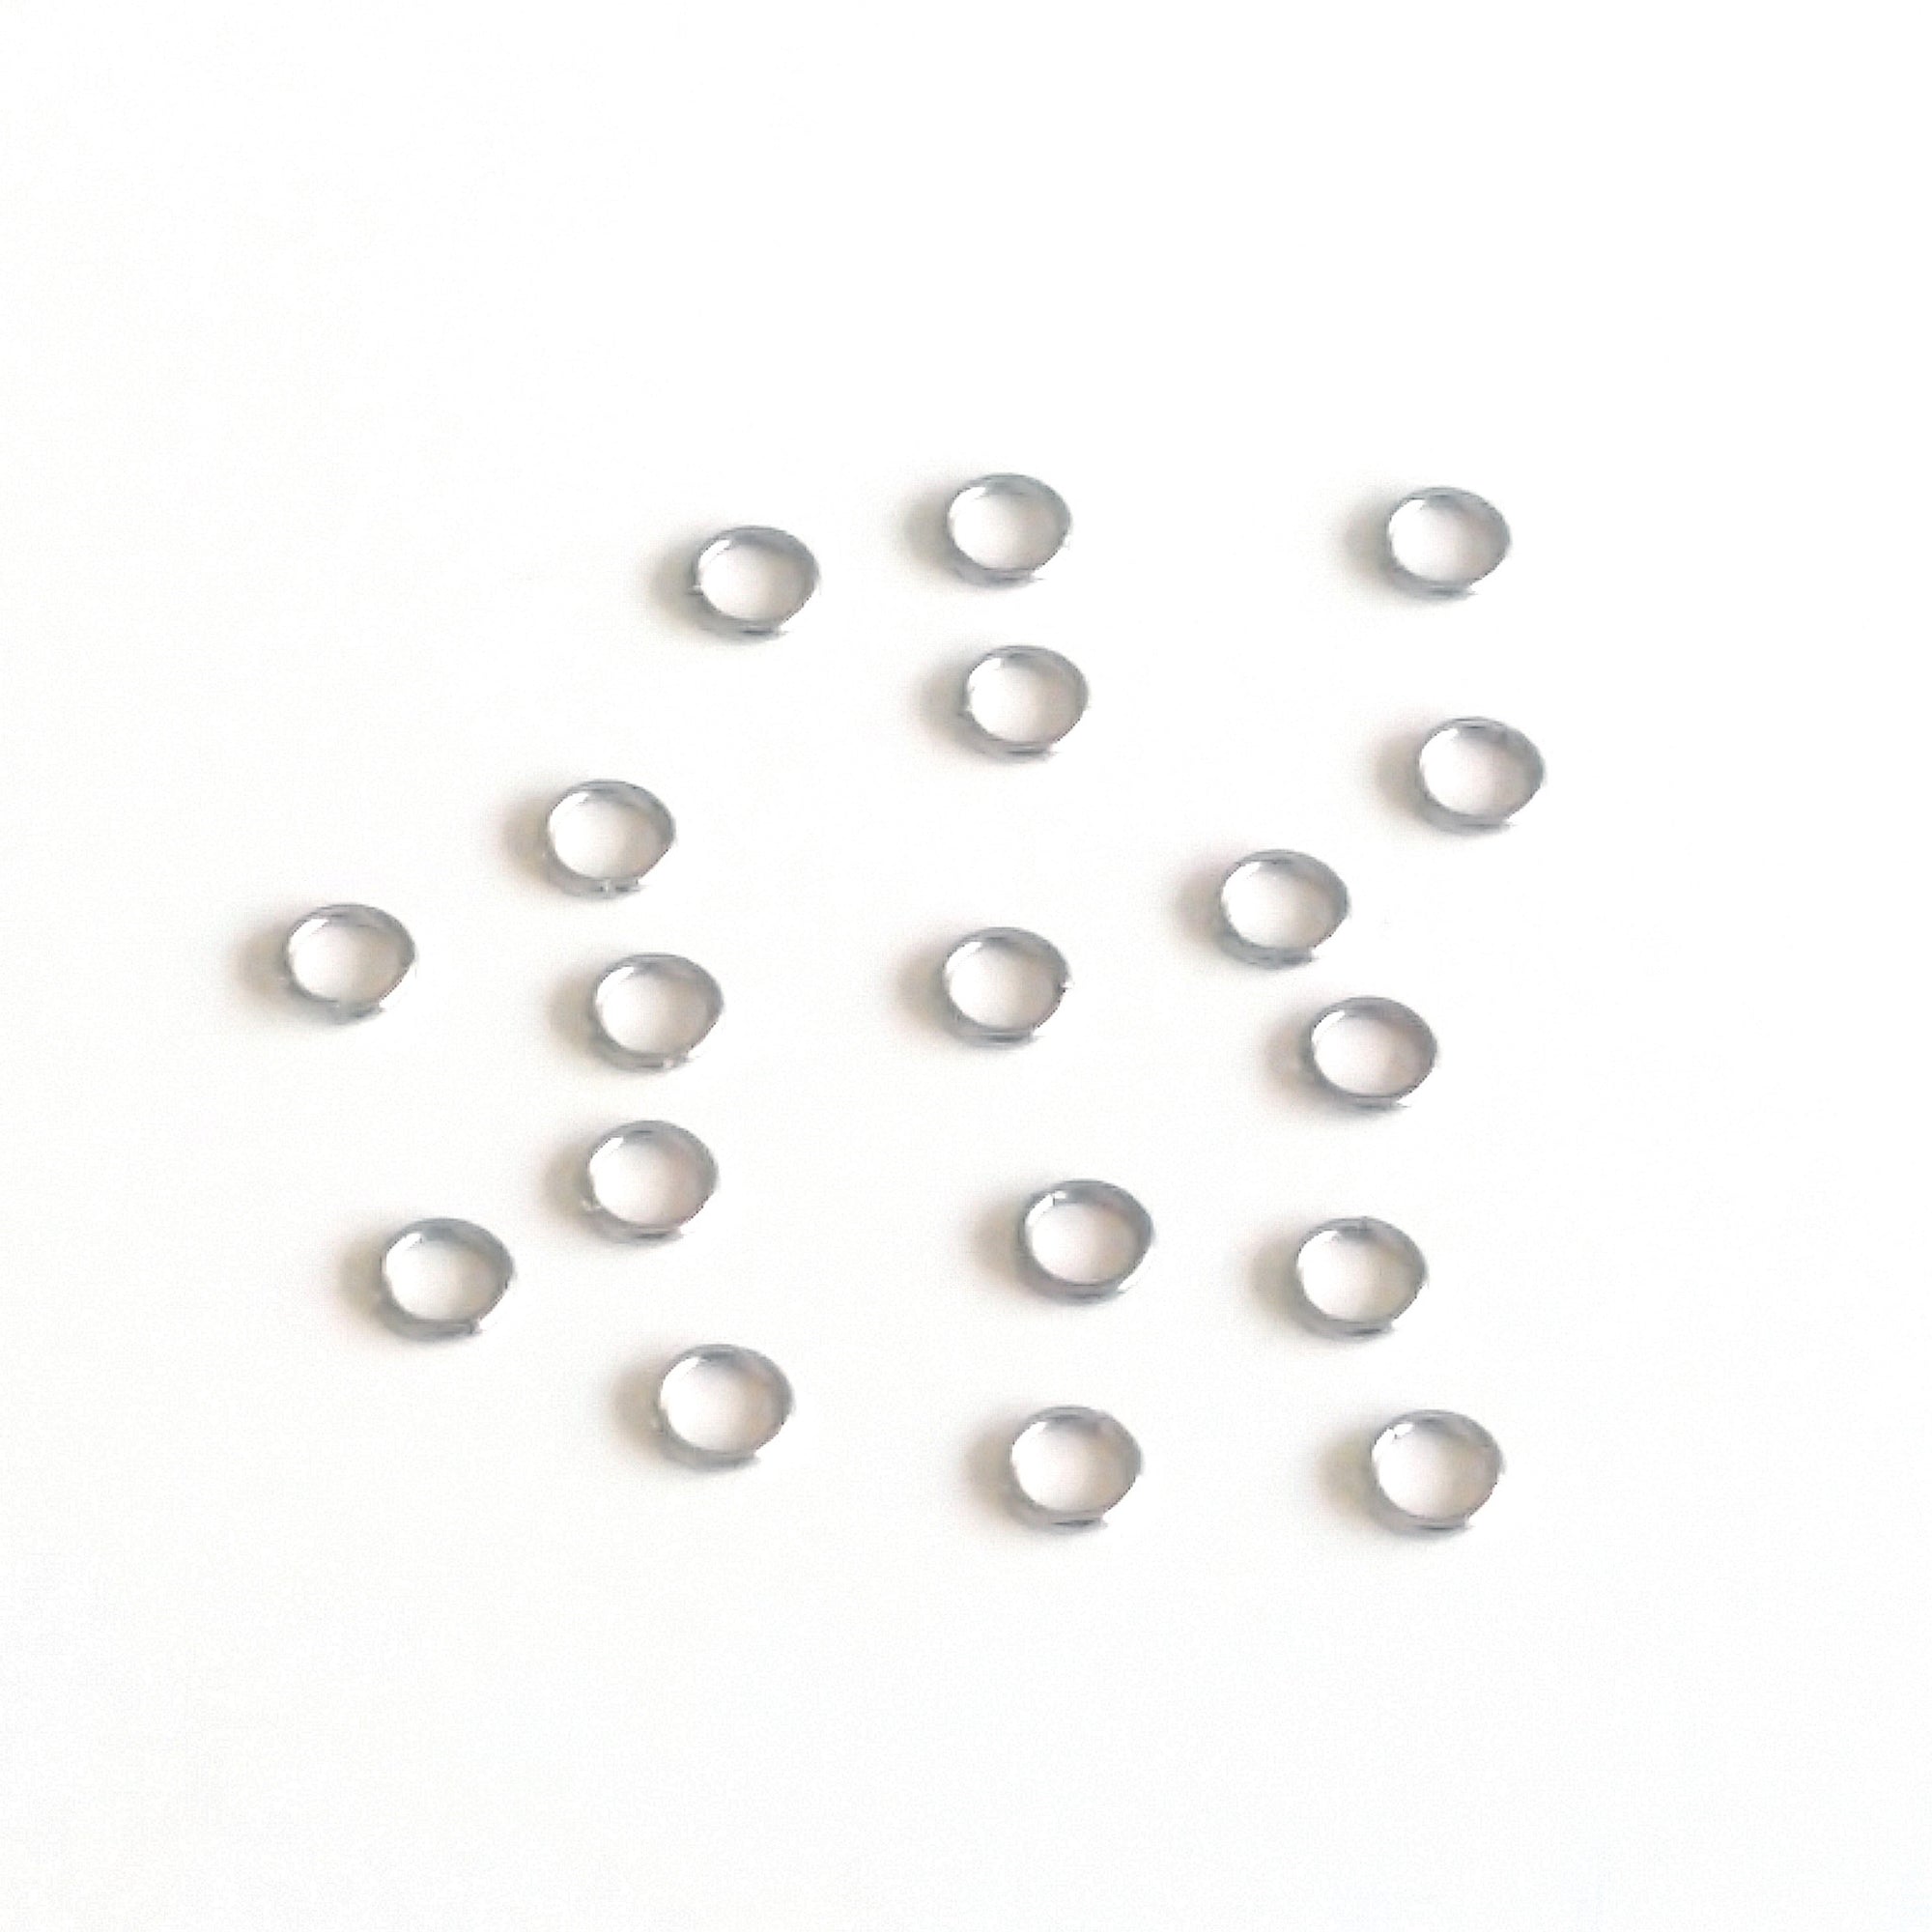 18g Soldered Sterling Silver Jump Rings 7mm OD 1 Mm Wire 5 or 10